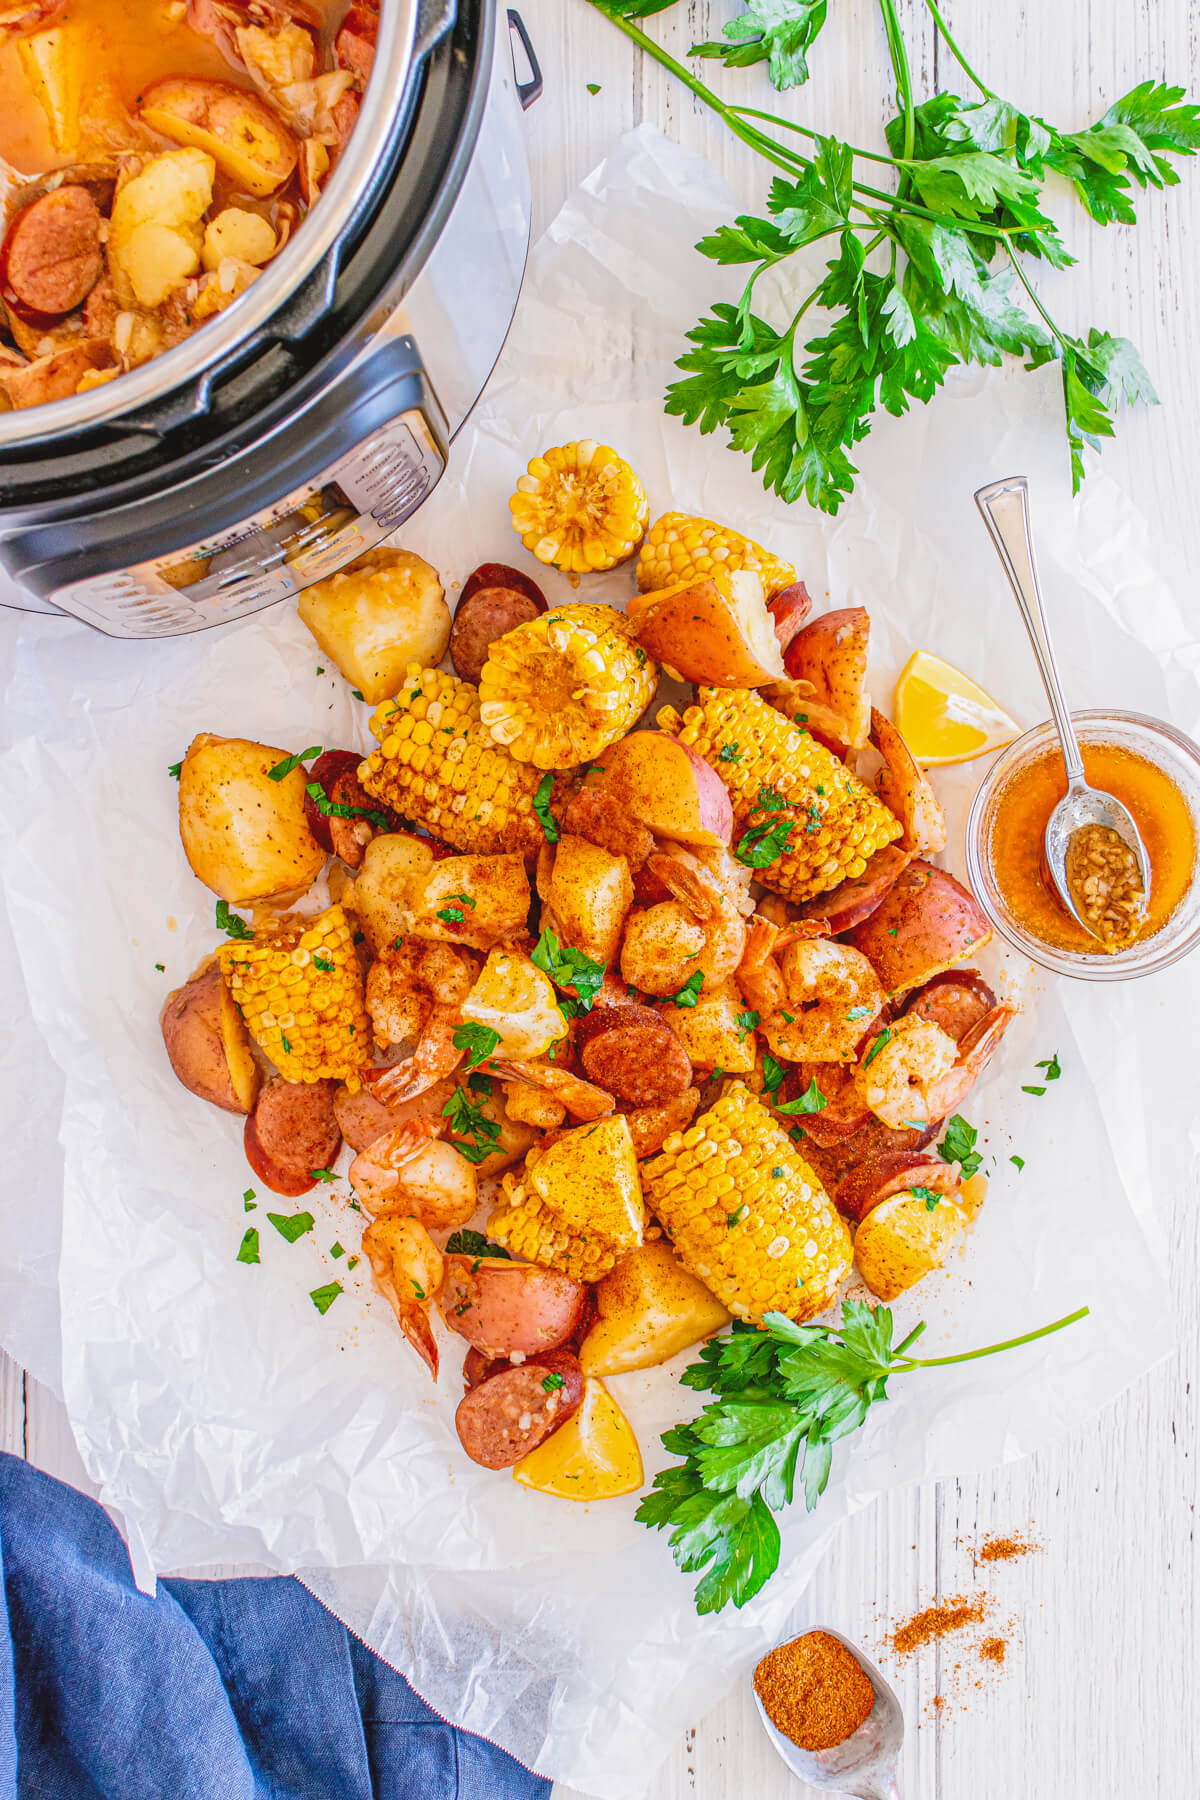 Cooked shrimp boil with spice coated shrimp, potatoes, sausage, and corn spread out on a white parchment paper.